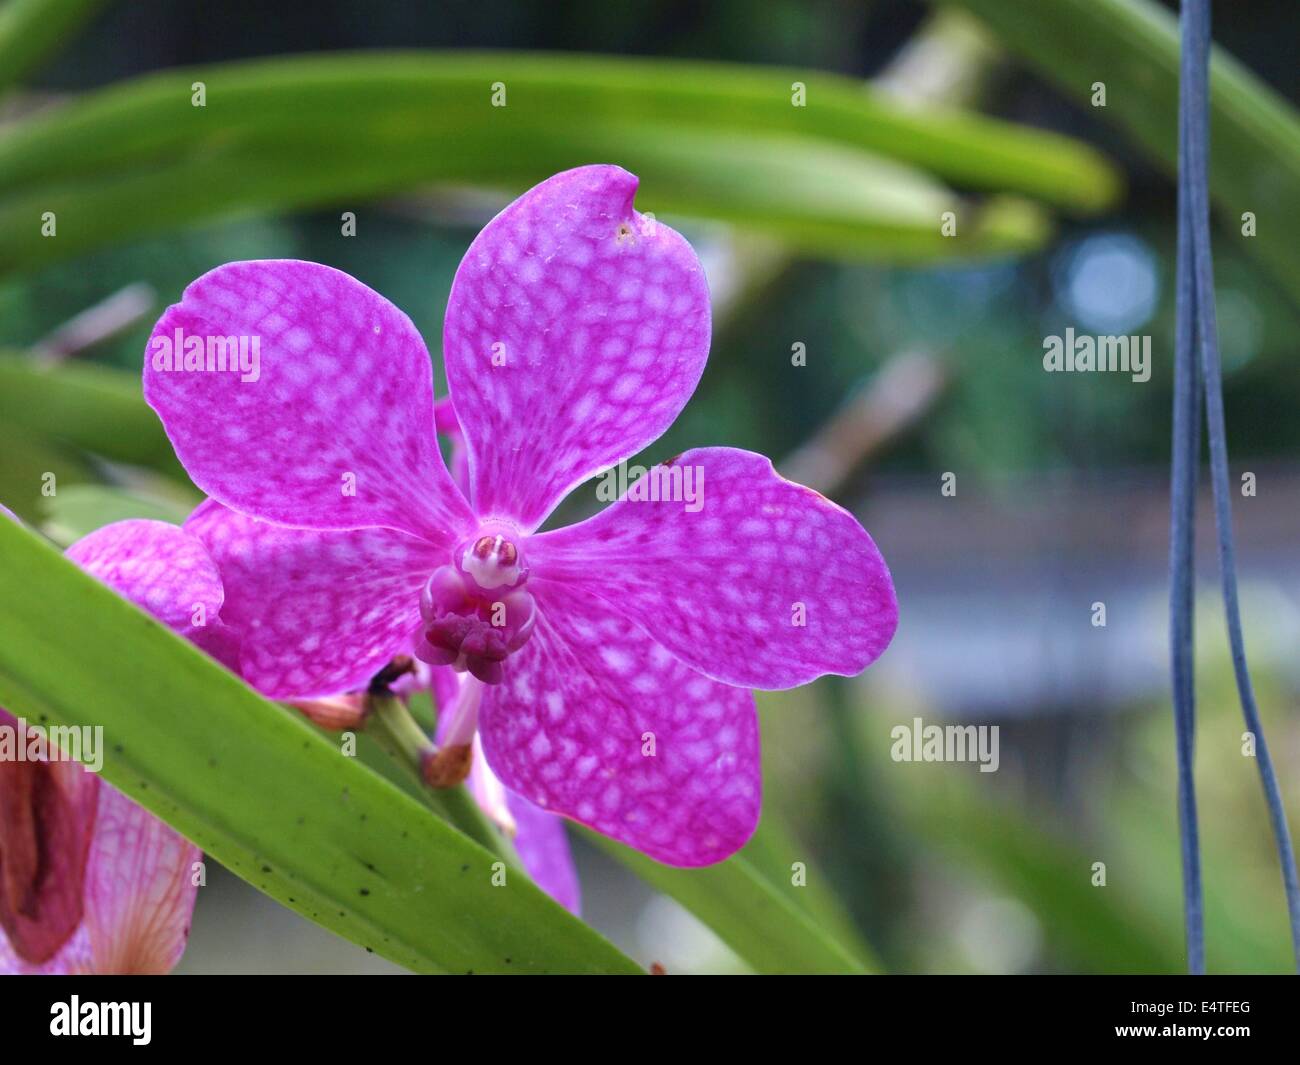 Isolated spotted Purple Vanda Orchid Stock Photo